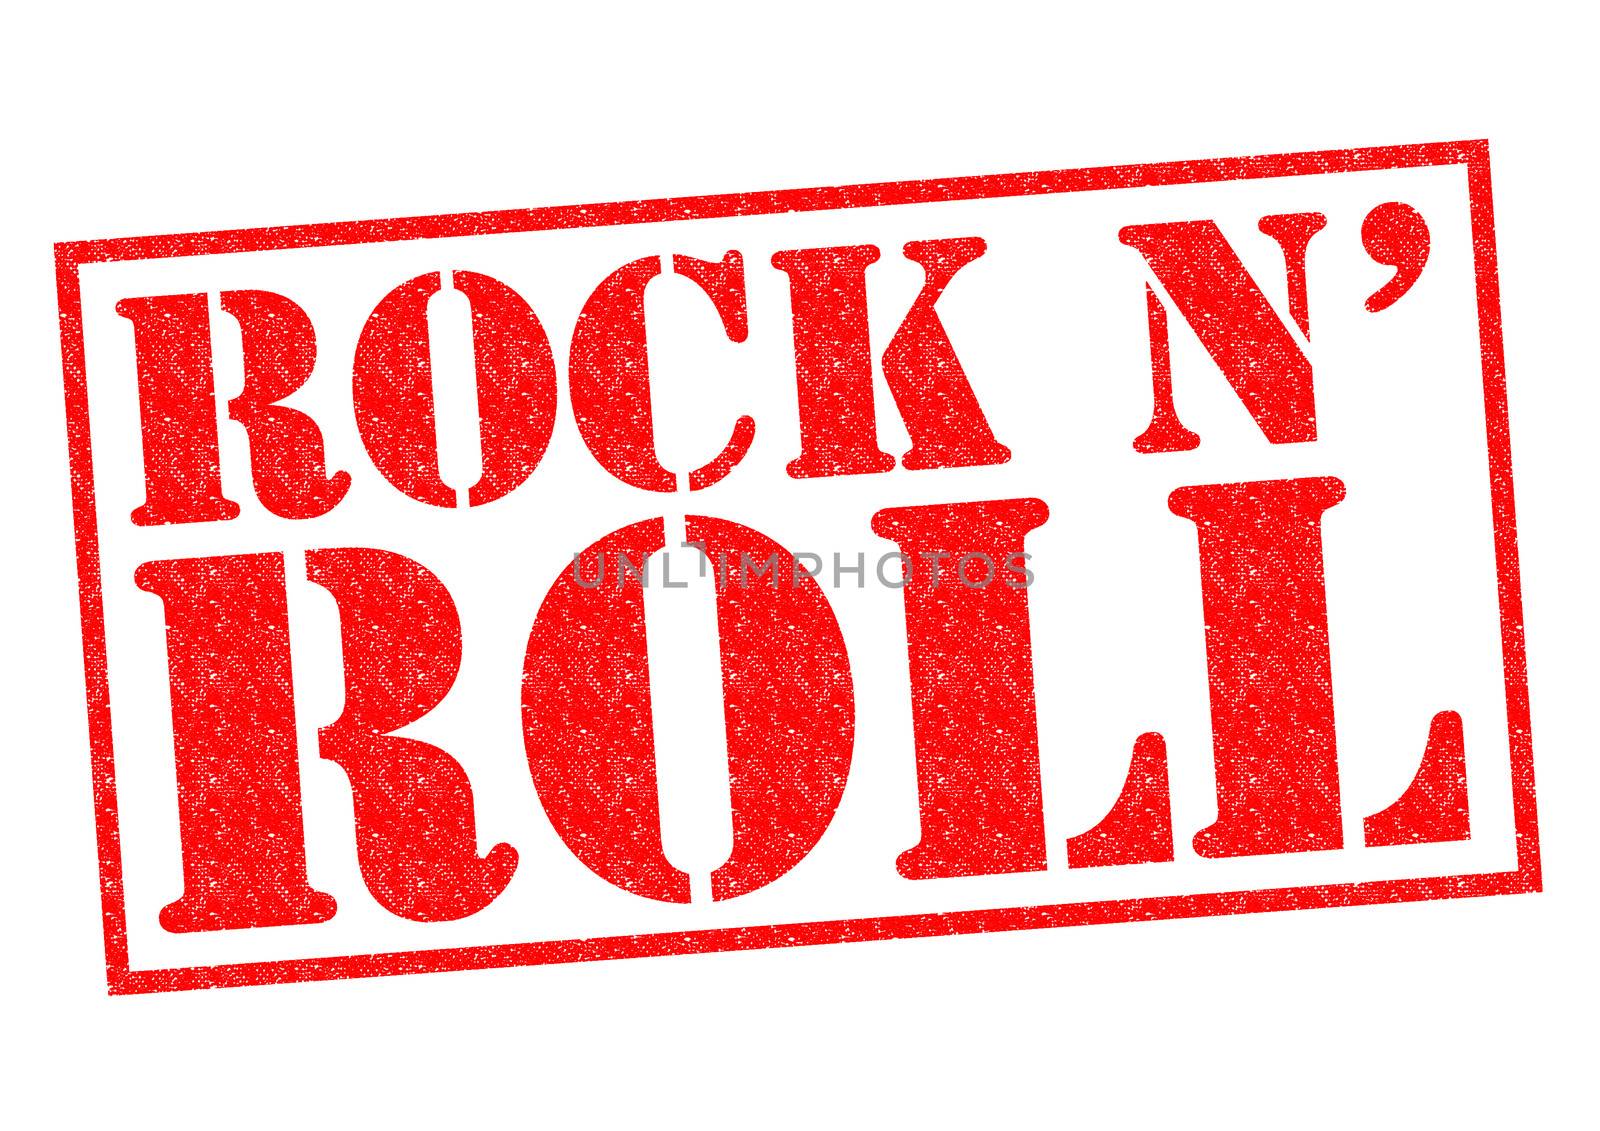 ROCK N' ROLL red Rubber Stamp over a white background.